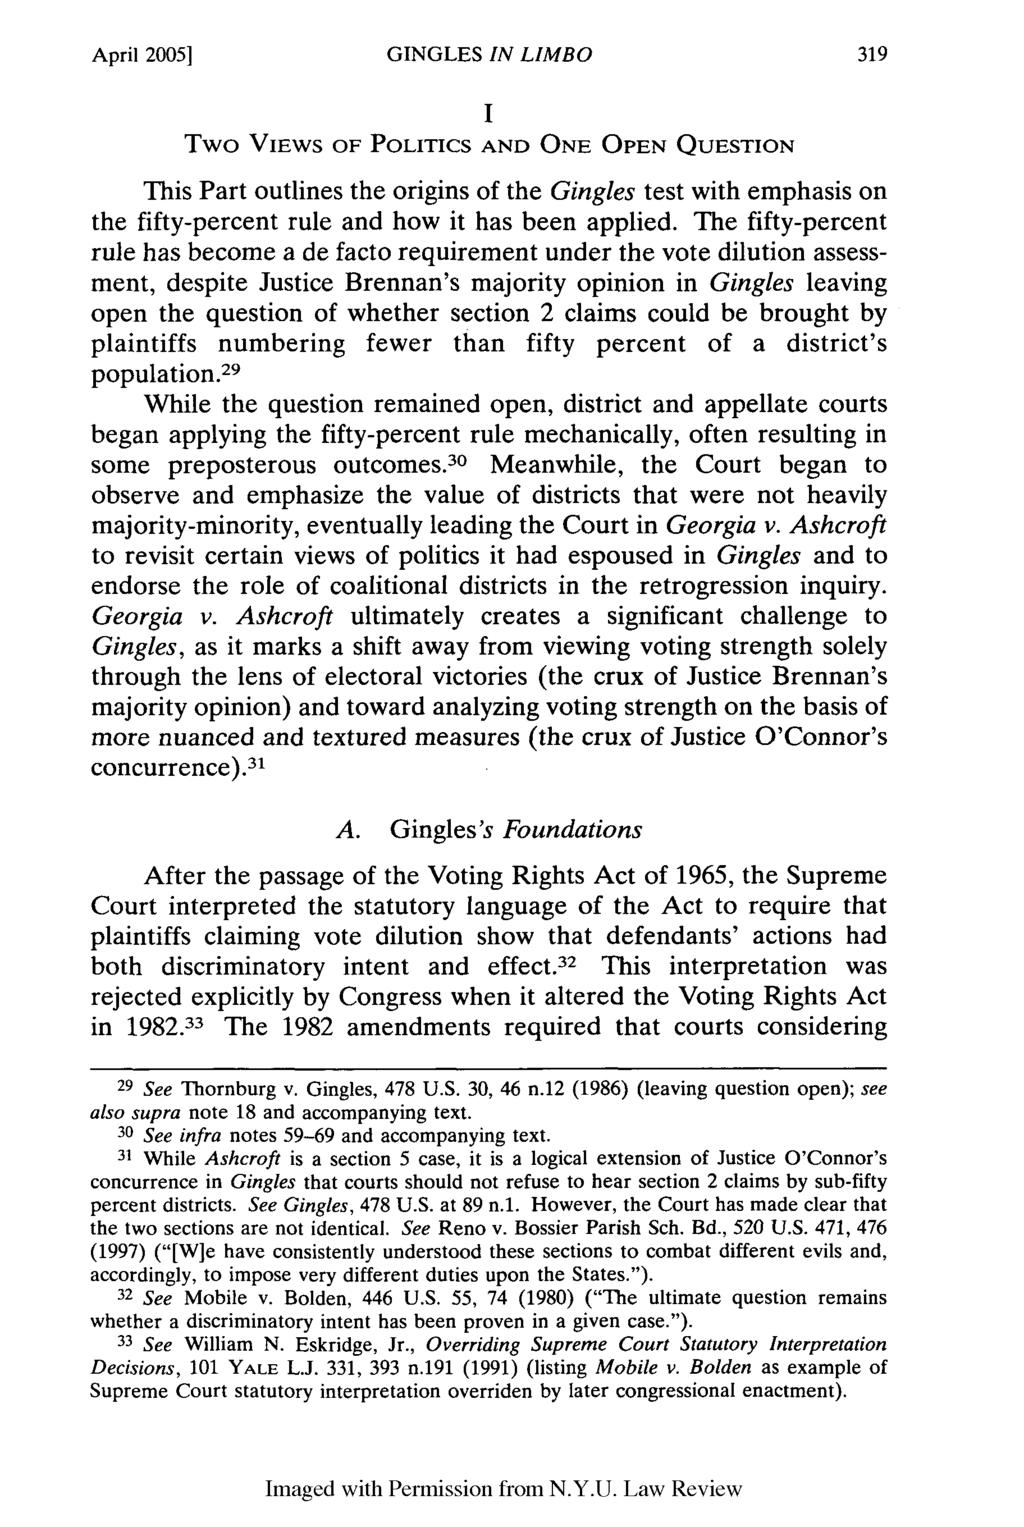 April 20051 GINGLES IN LIMBO I Two VIEWS OF POLITICS AND ONE OPEN QUESTION This Part outlines the origins of the Gingles test with emphasis on the fifty-percent rule and how it has been applied.